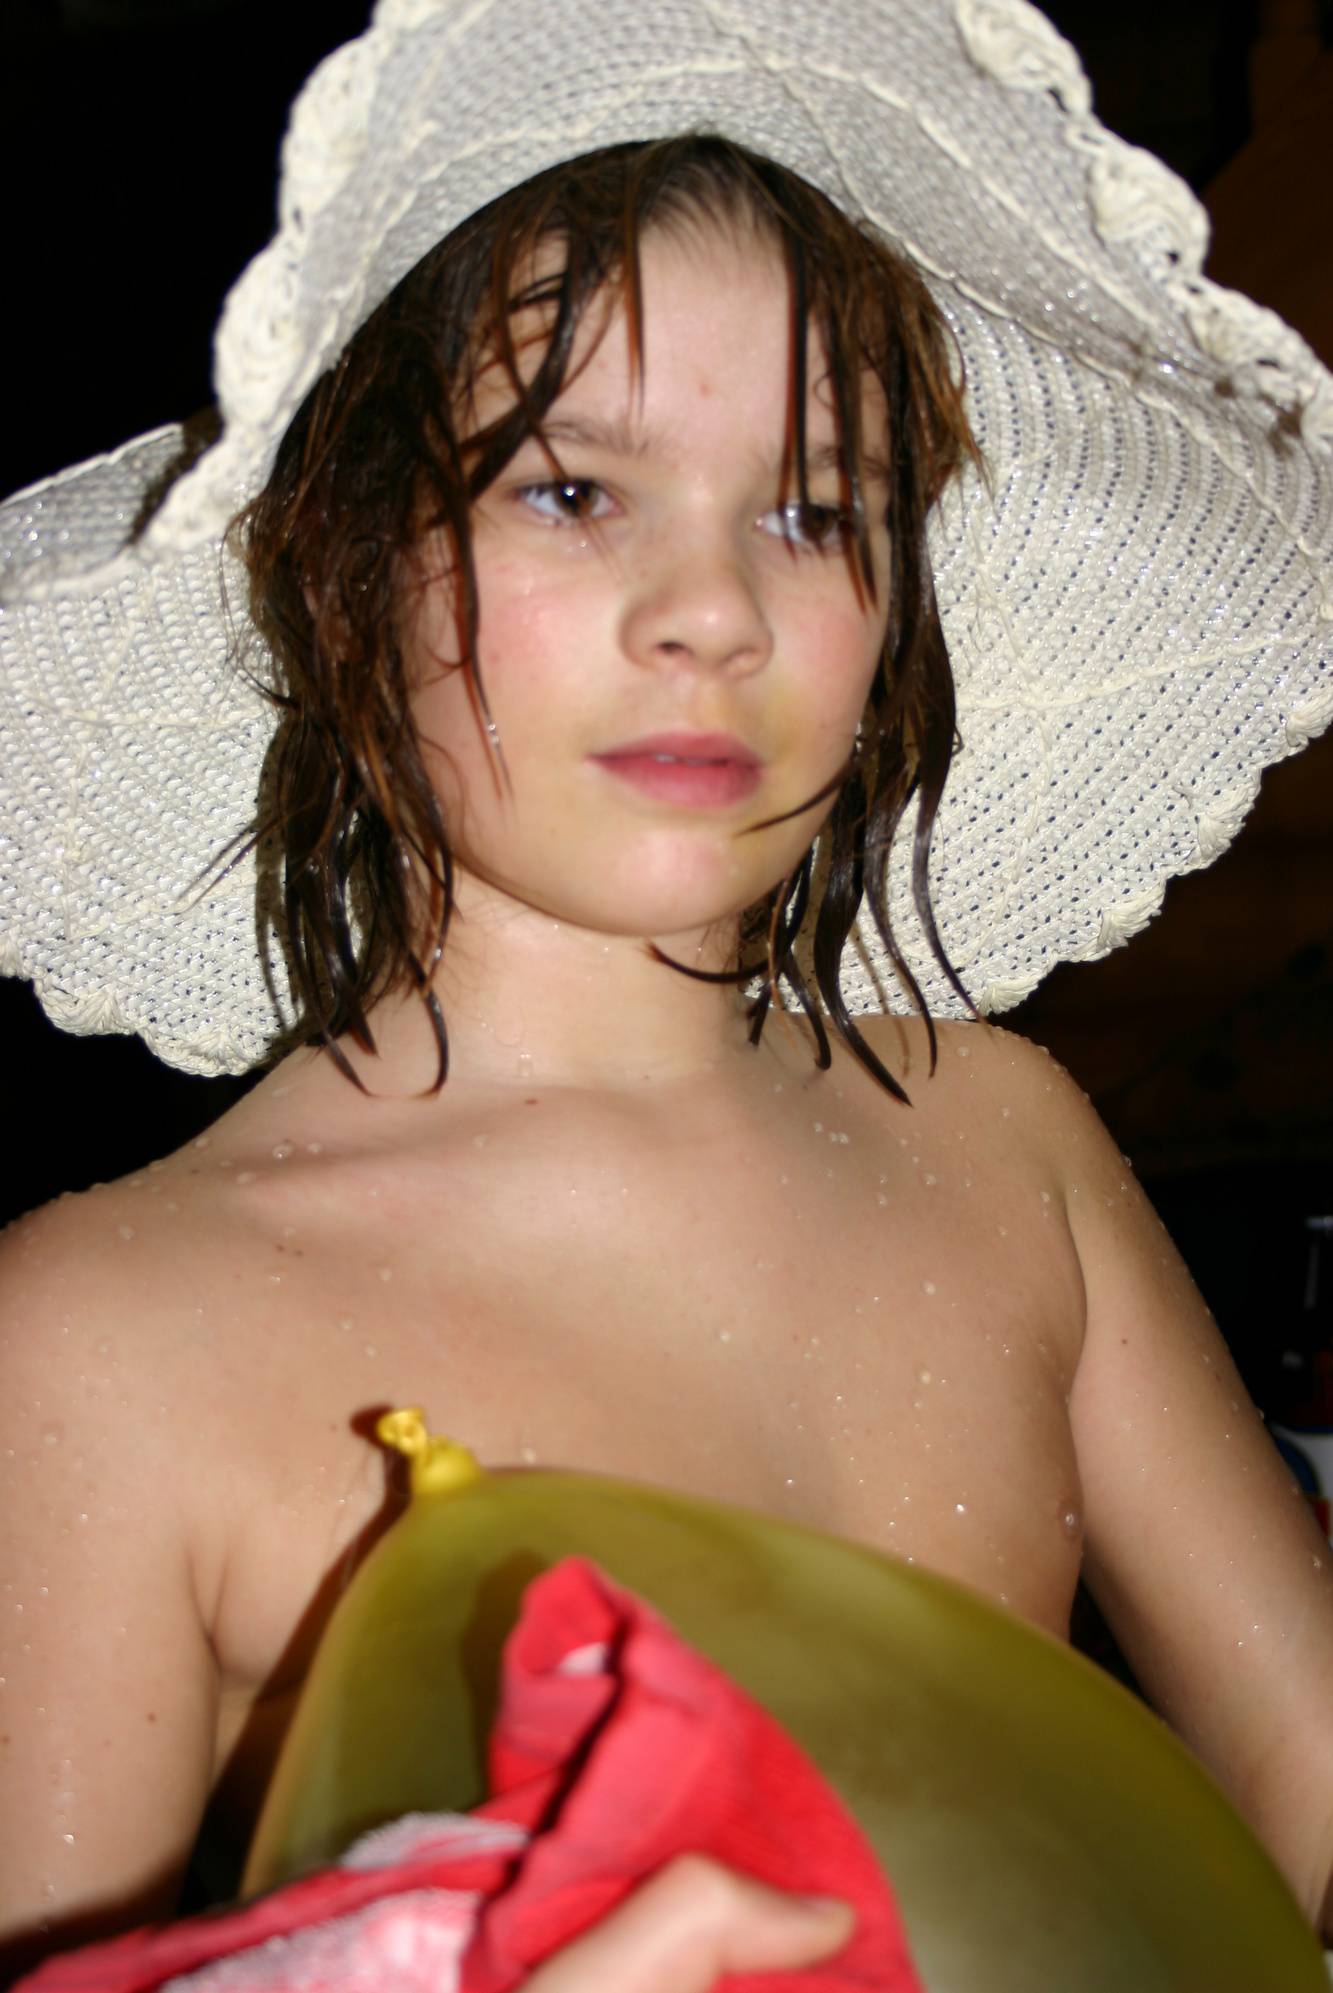 Pure Nudism Pics Easter Kids With Baskets - 1